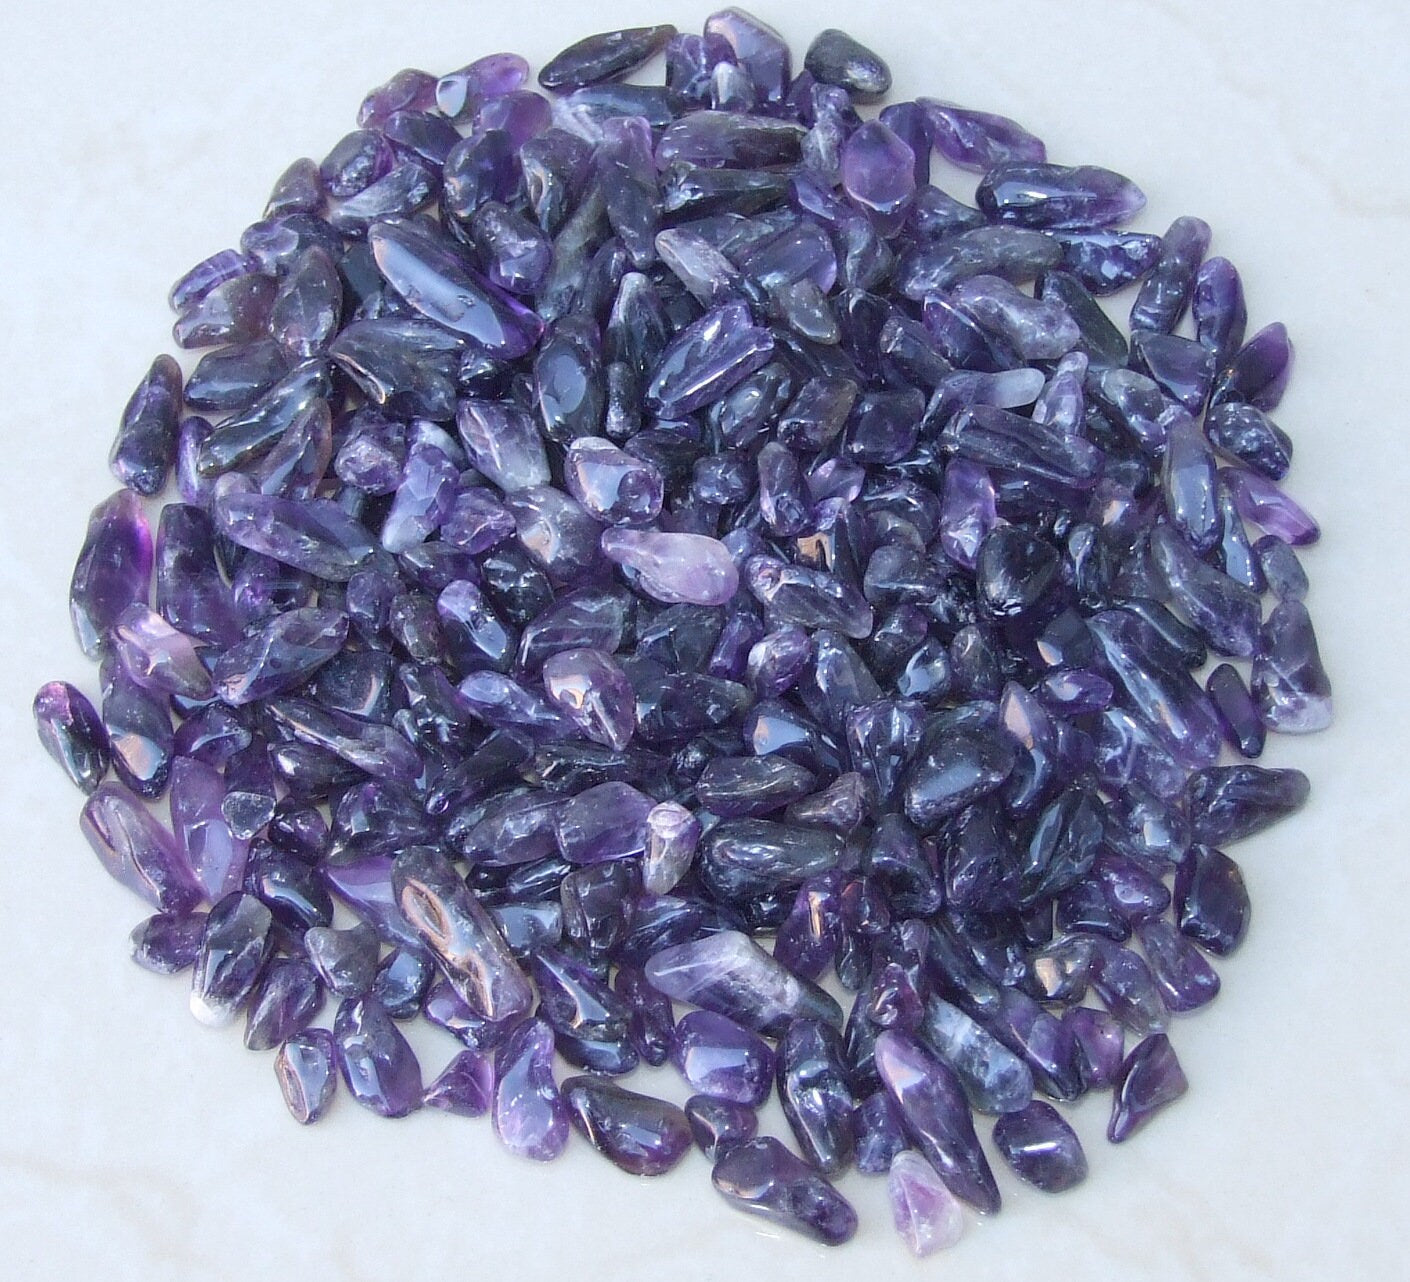 Small Amethyst Polished Stones, Gemstones, Natural Amethyst, Undrilled Gemstone Beads, Loose Bulk Jewelry Stones Nuggets, 1.5 oz 7mm to 23mm